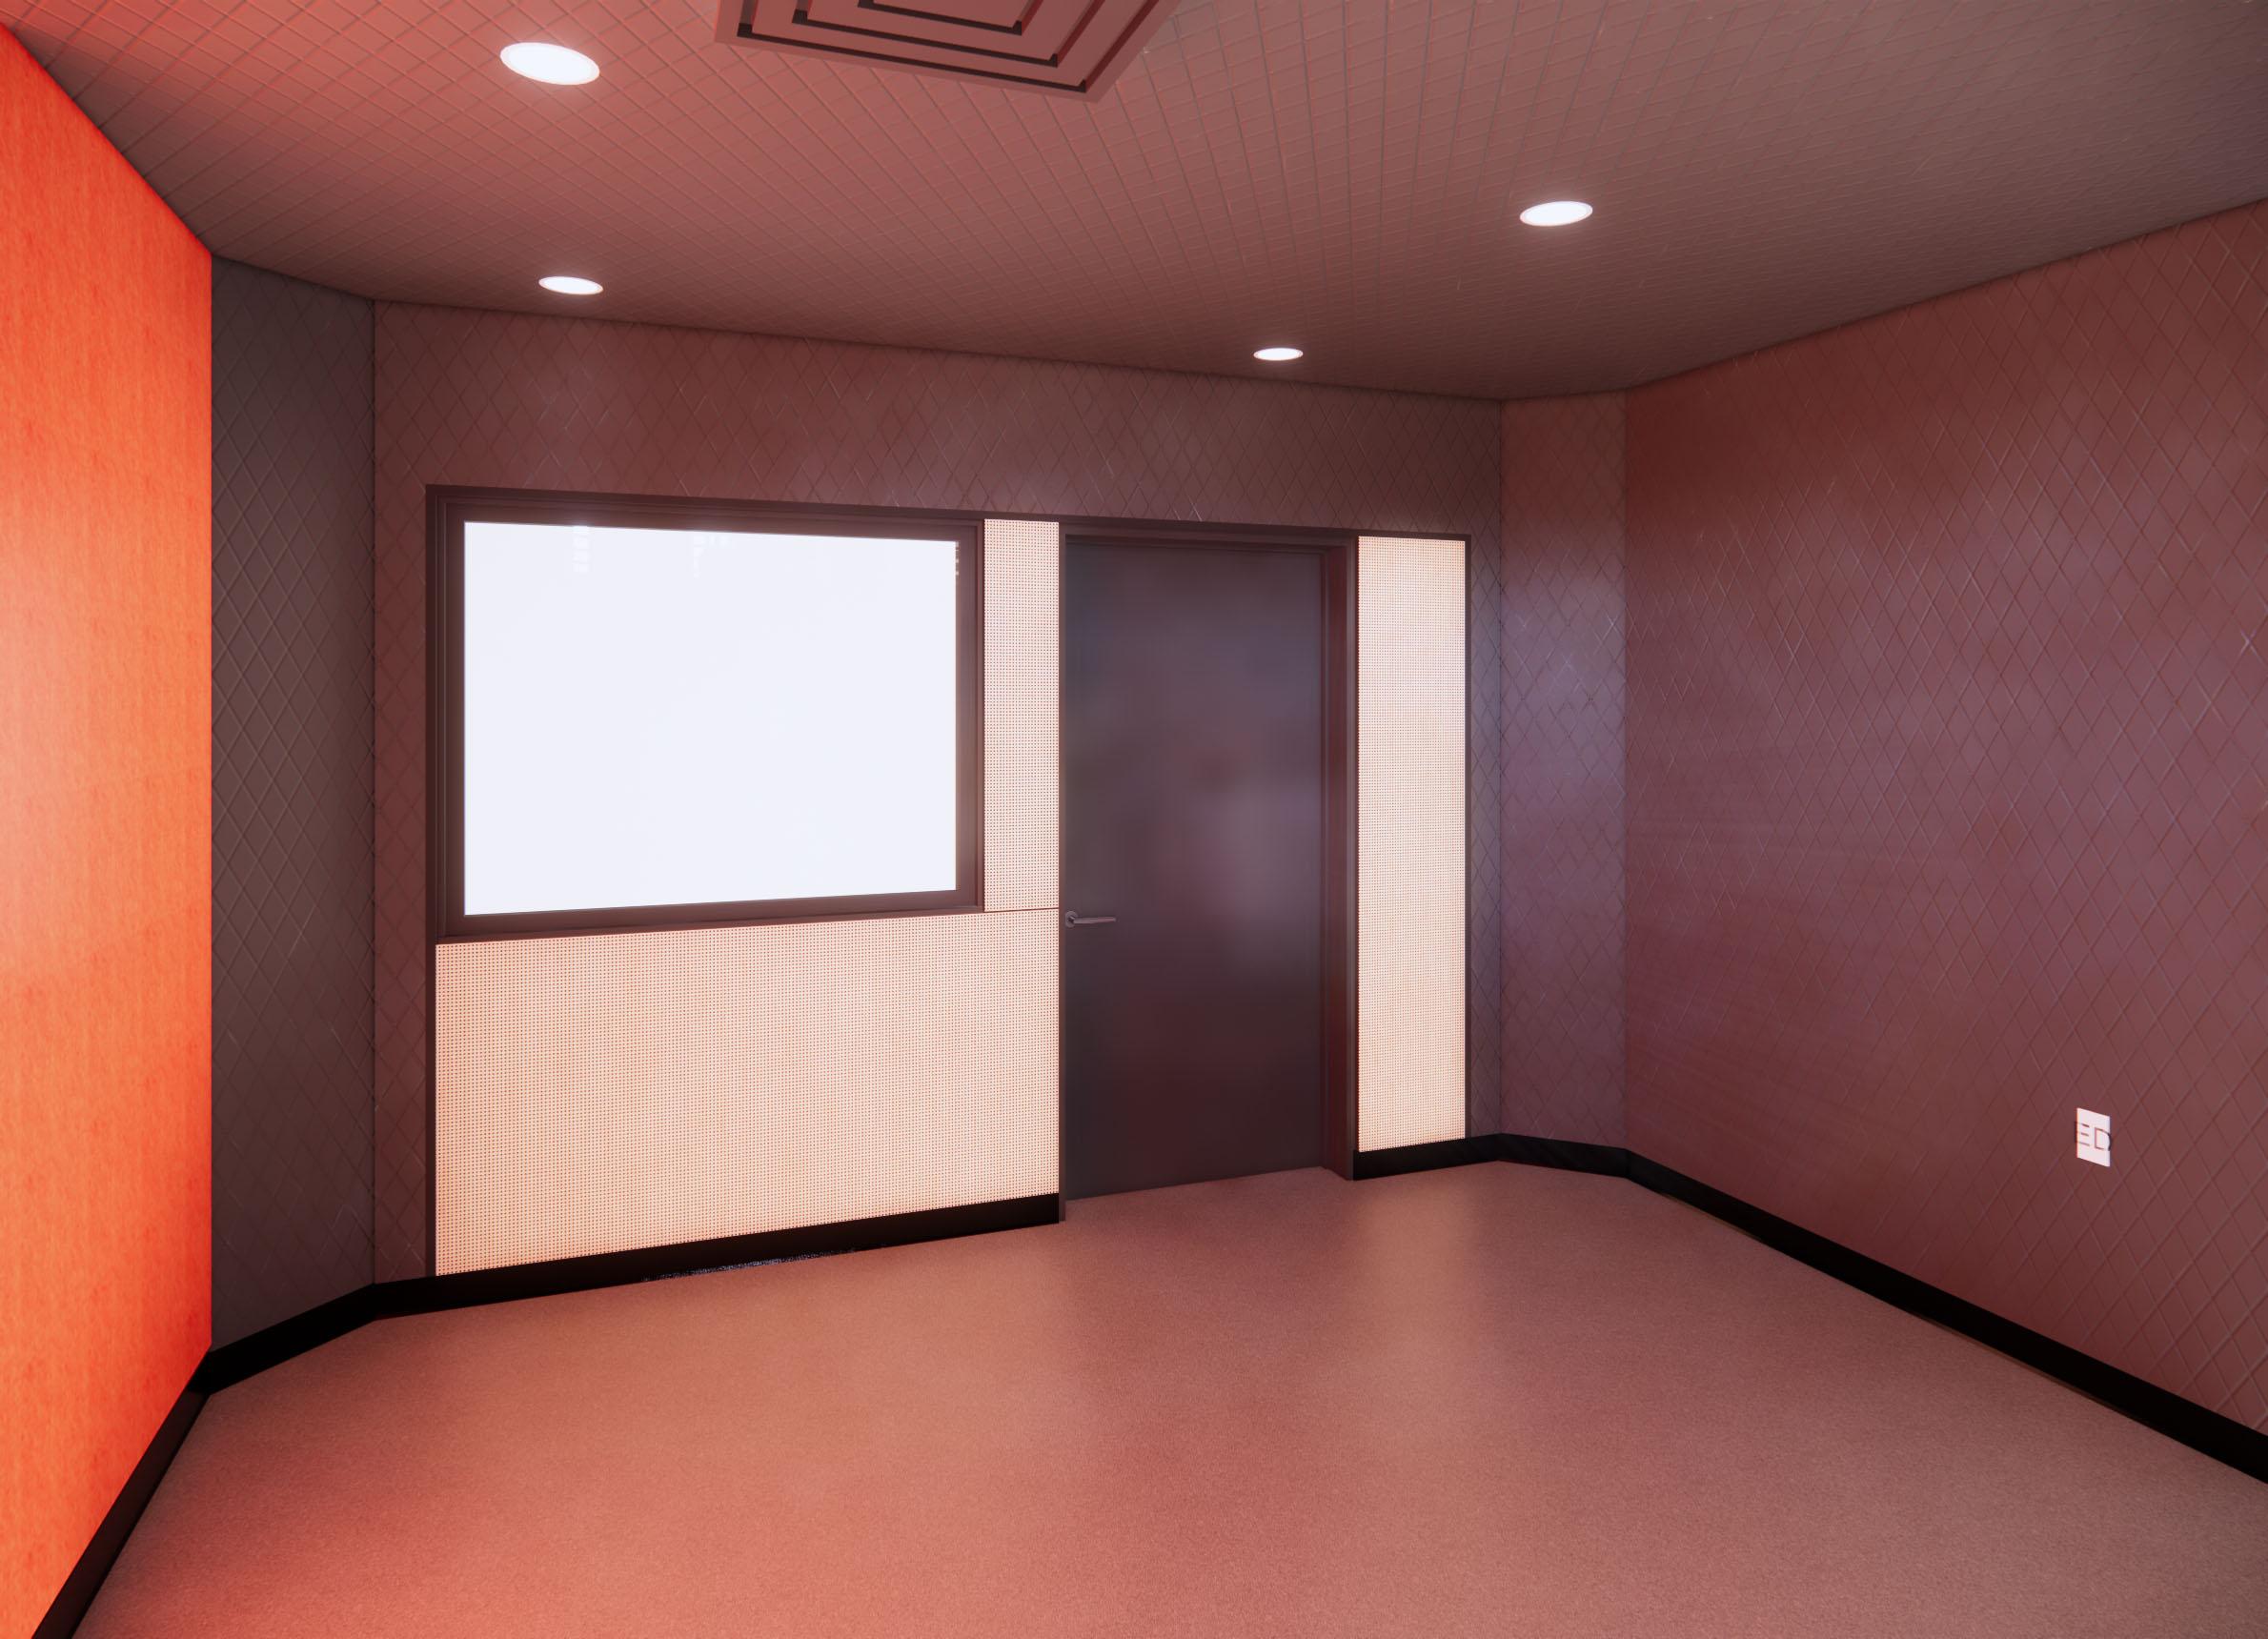 Digital render of the Recording booth.